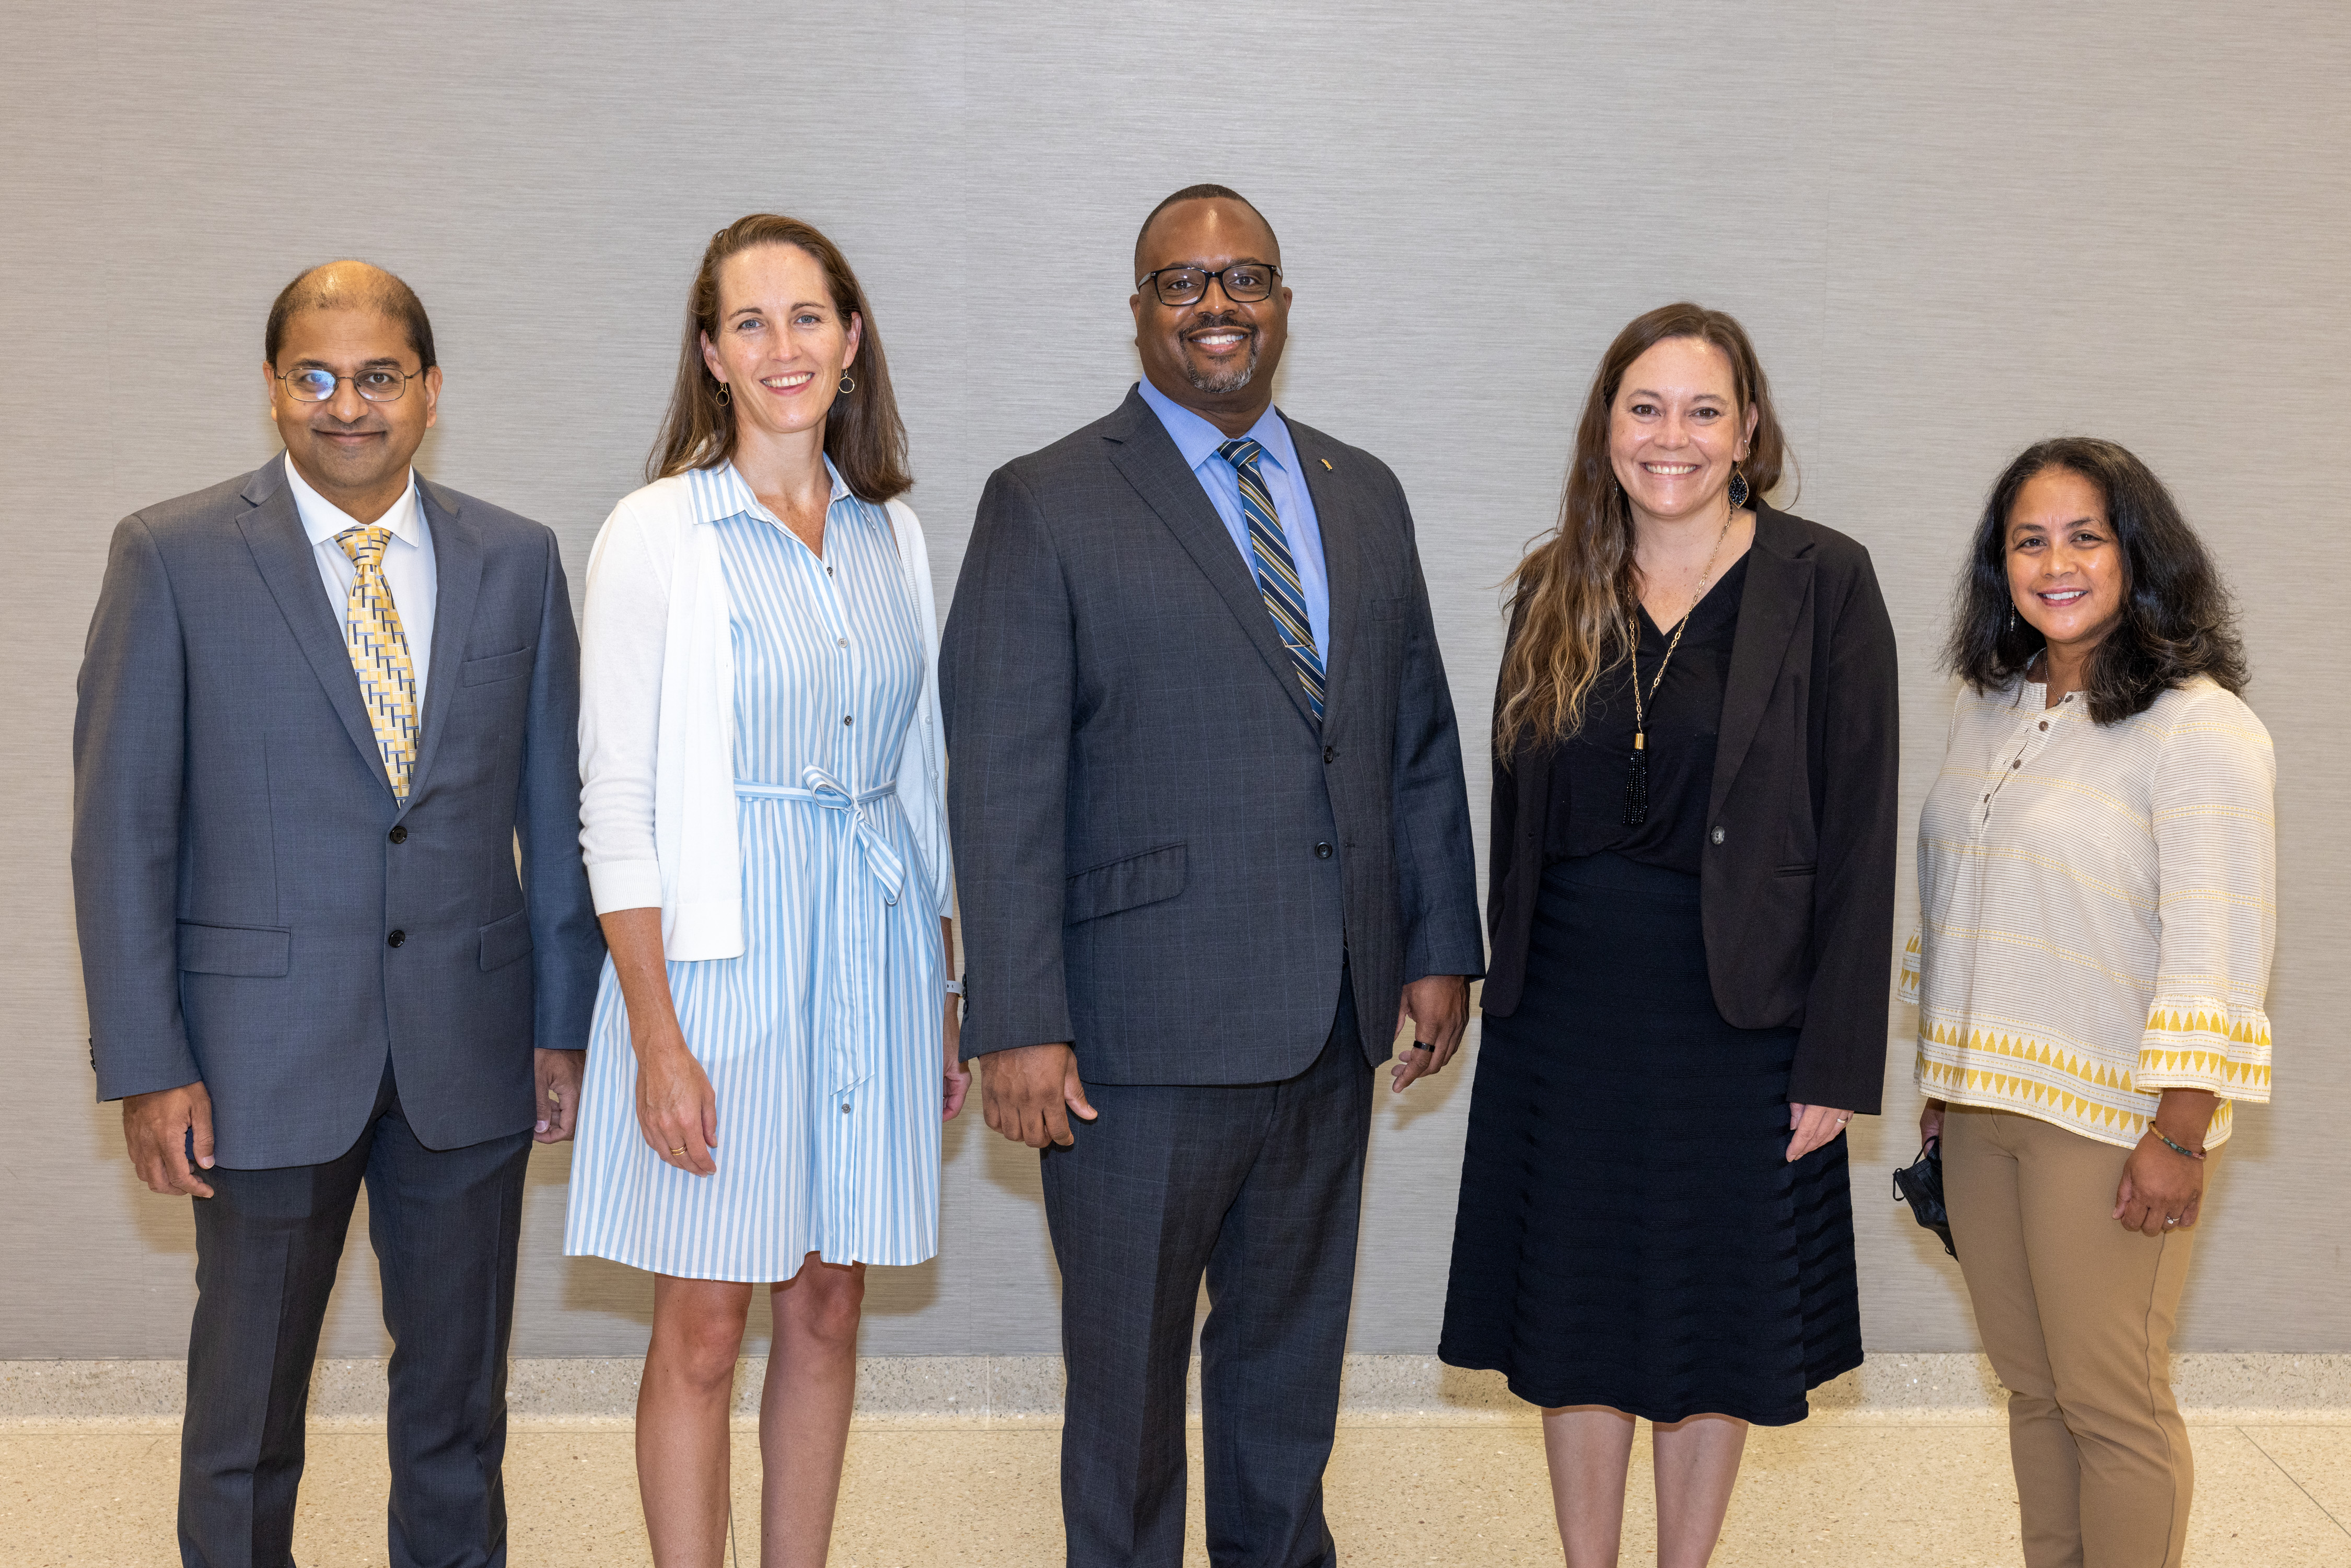 Dr. Griffith with representatives from the HESJ Planning Committee – from left, Raj Shah, Maureen Benjamins, Derek Griffith, Suzanne Carlberg-Racich, Maria Ferrera